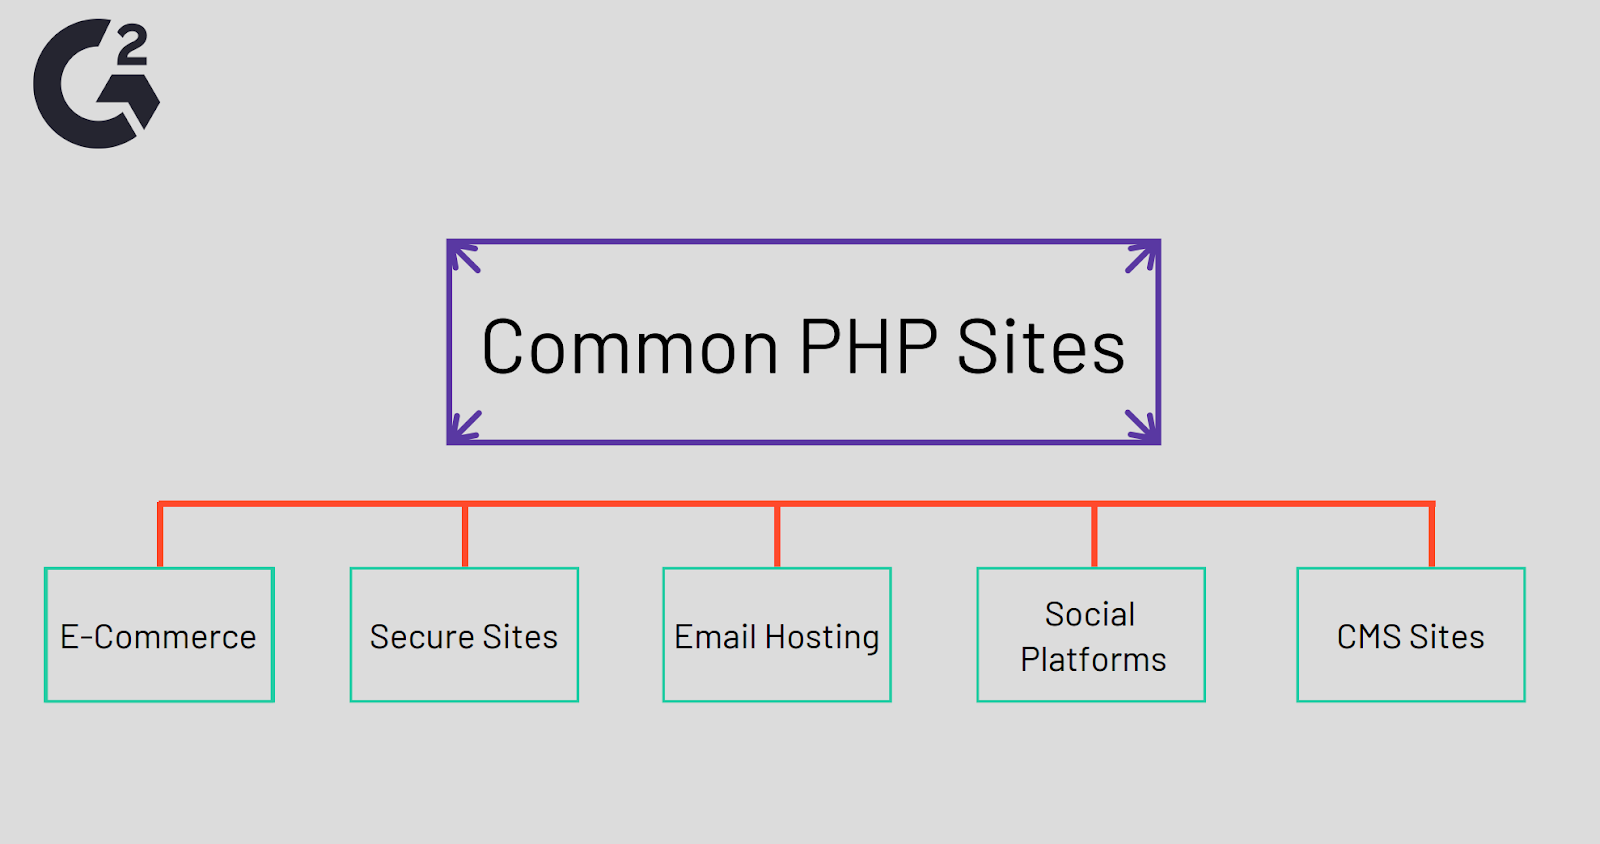 Sites that commonly use PHP, including CMS sites and social platforms